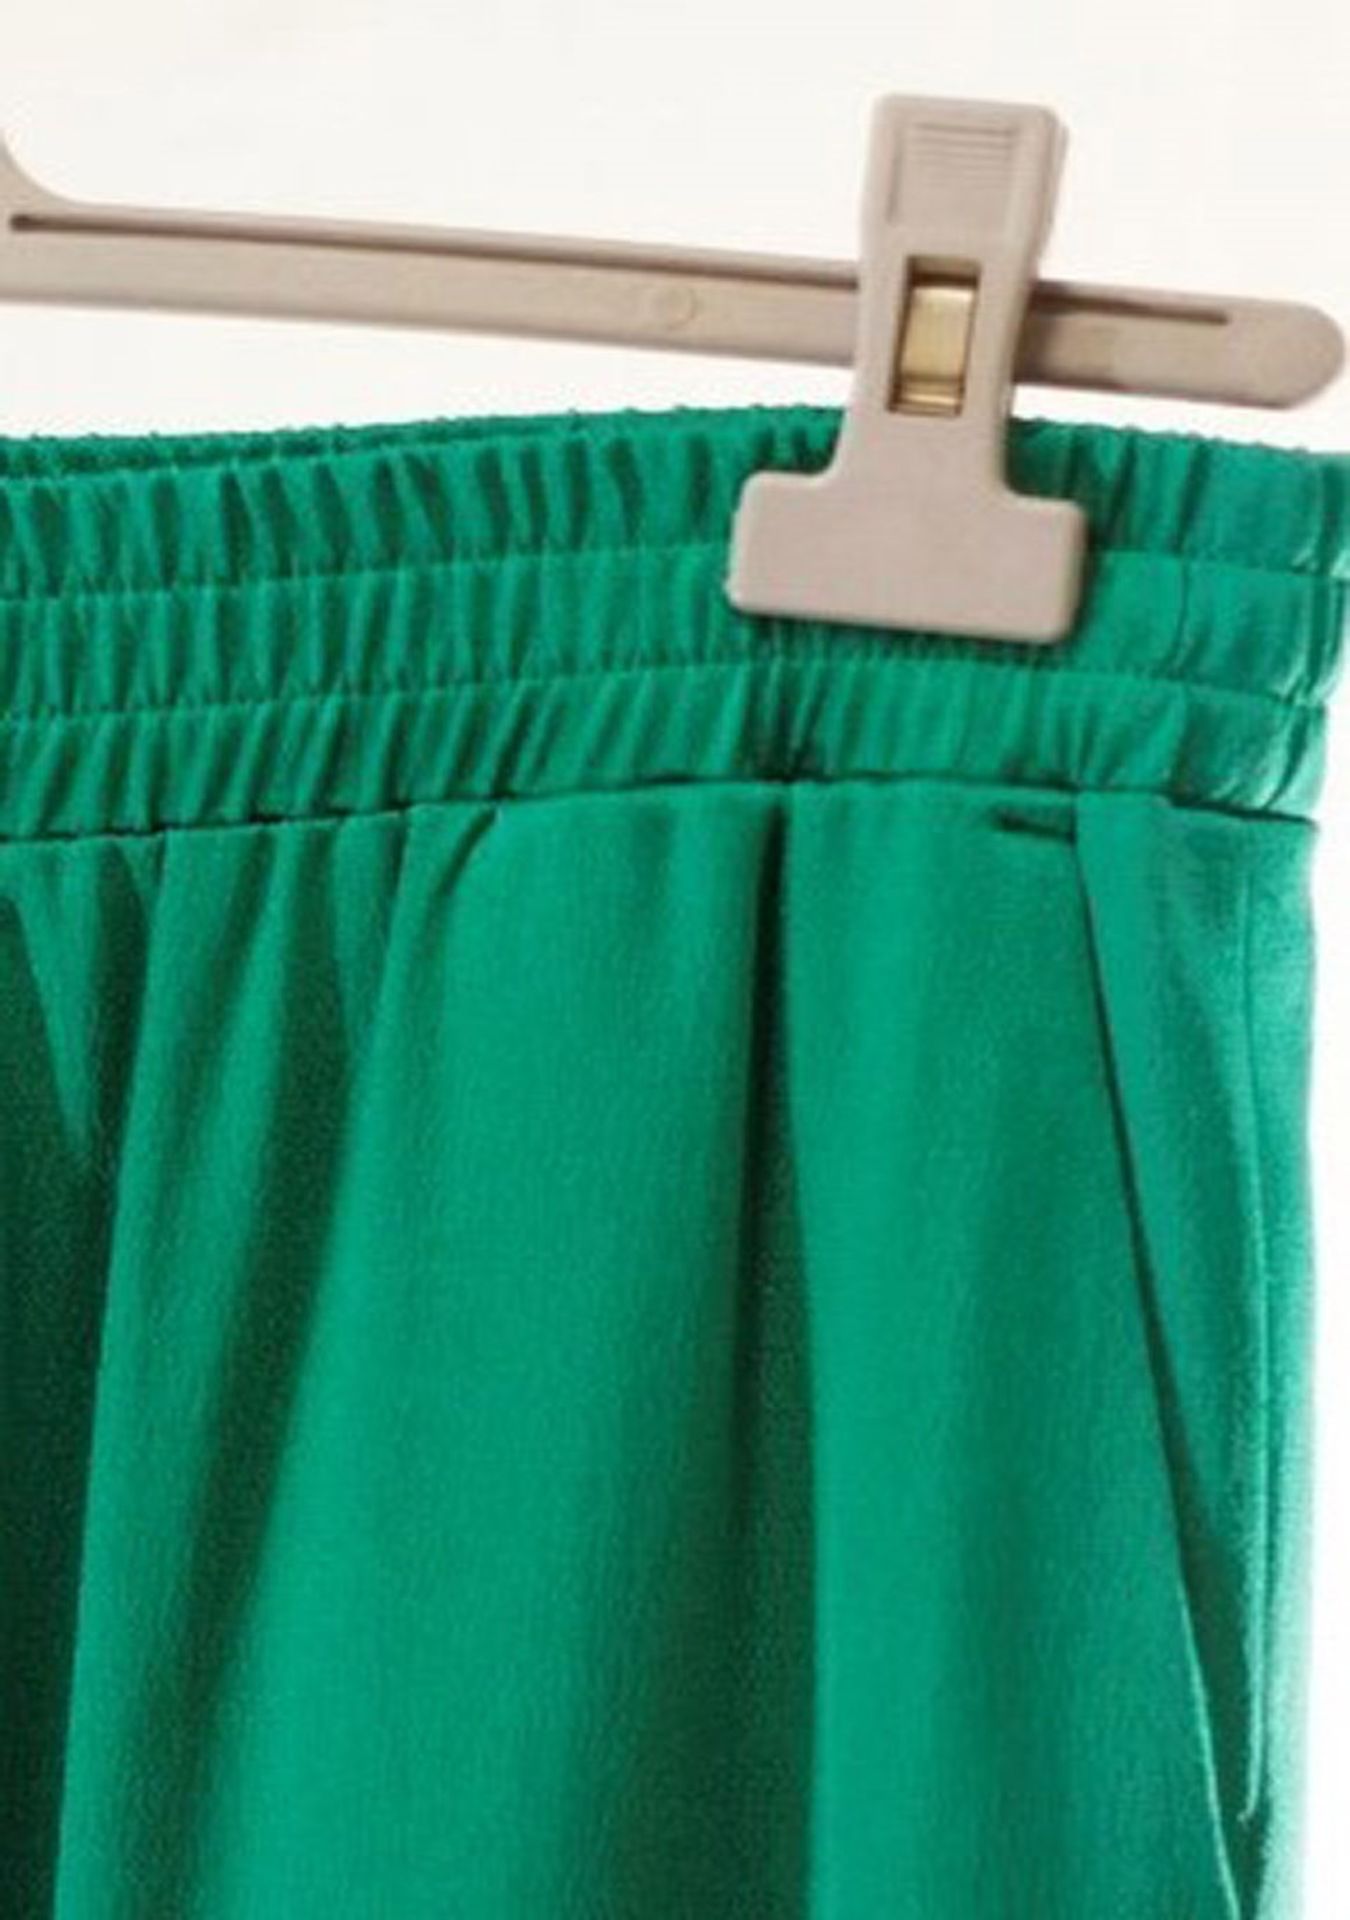 1 x Michael Kors Green Trousers - Size: 12 - Material: 71% Acetate, 29% Rayon - From a High End - Image 4 of 4